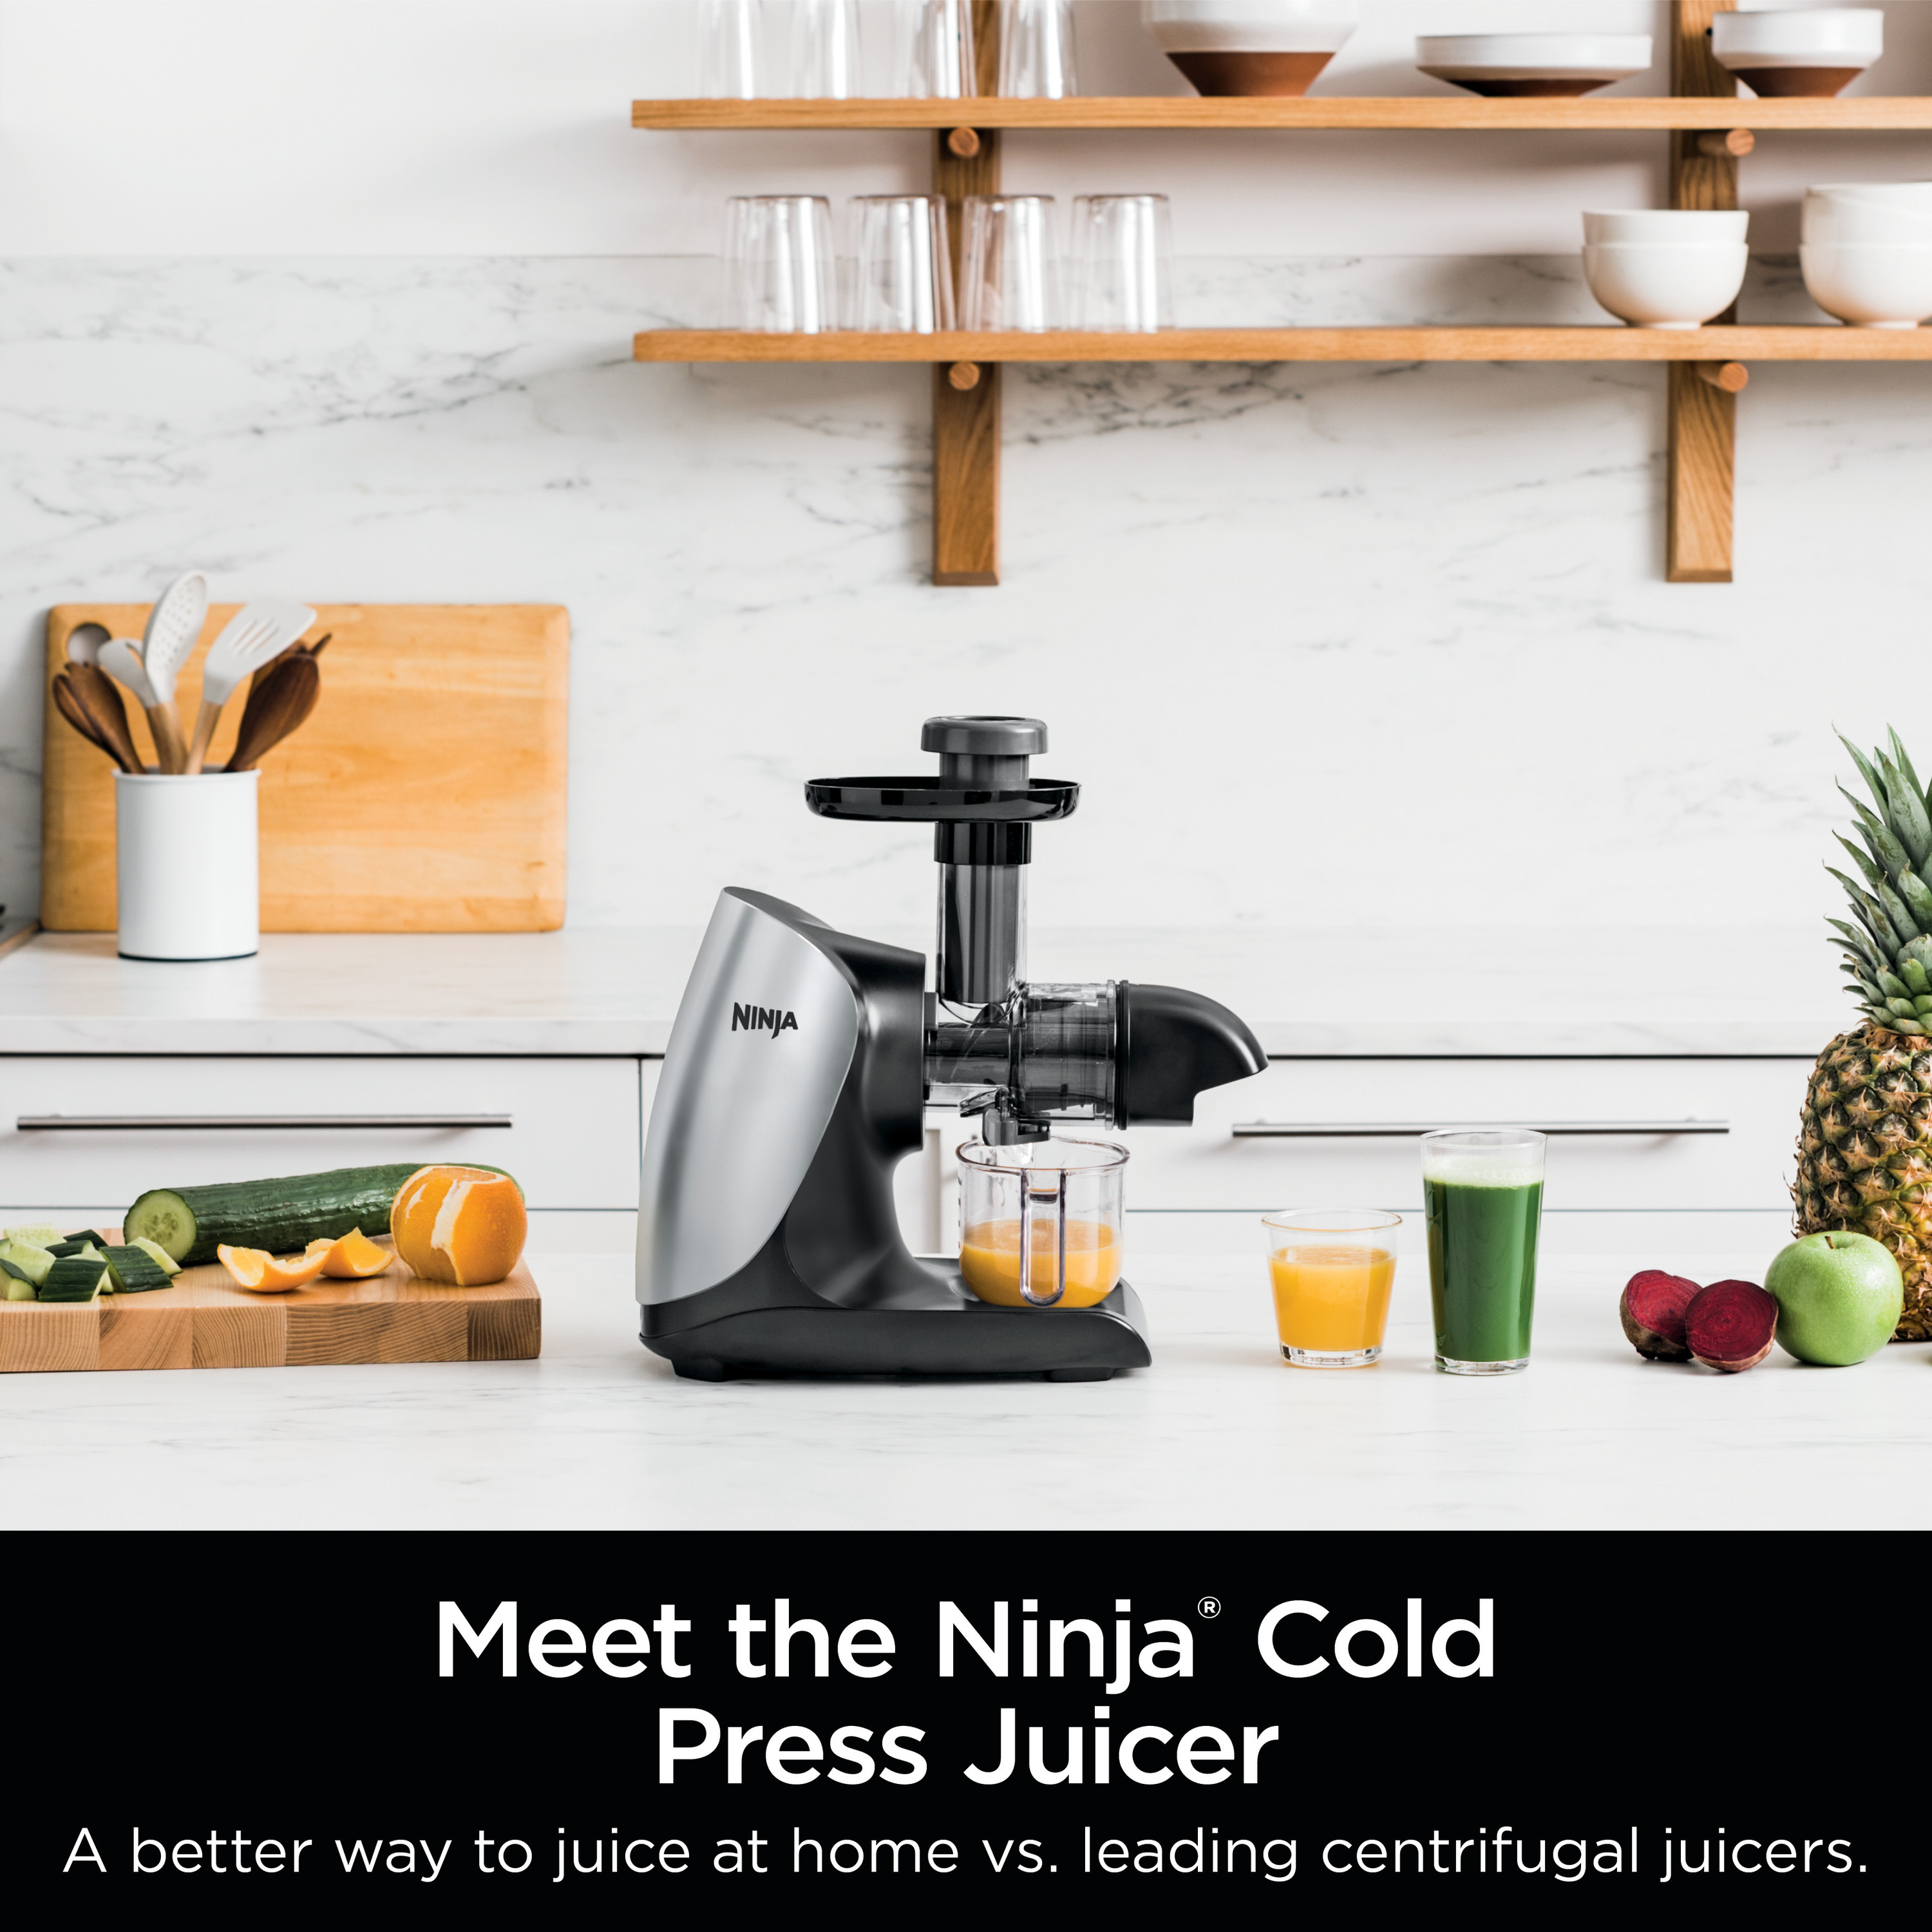 Ninja® Cold Press Juicer Pro - Powerful Slow Juicer with Total Pulp Control - Cloud Silver, JC100 - image 4 of 13